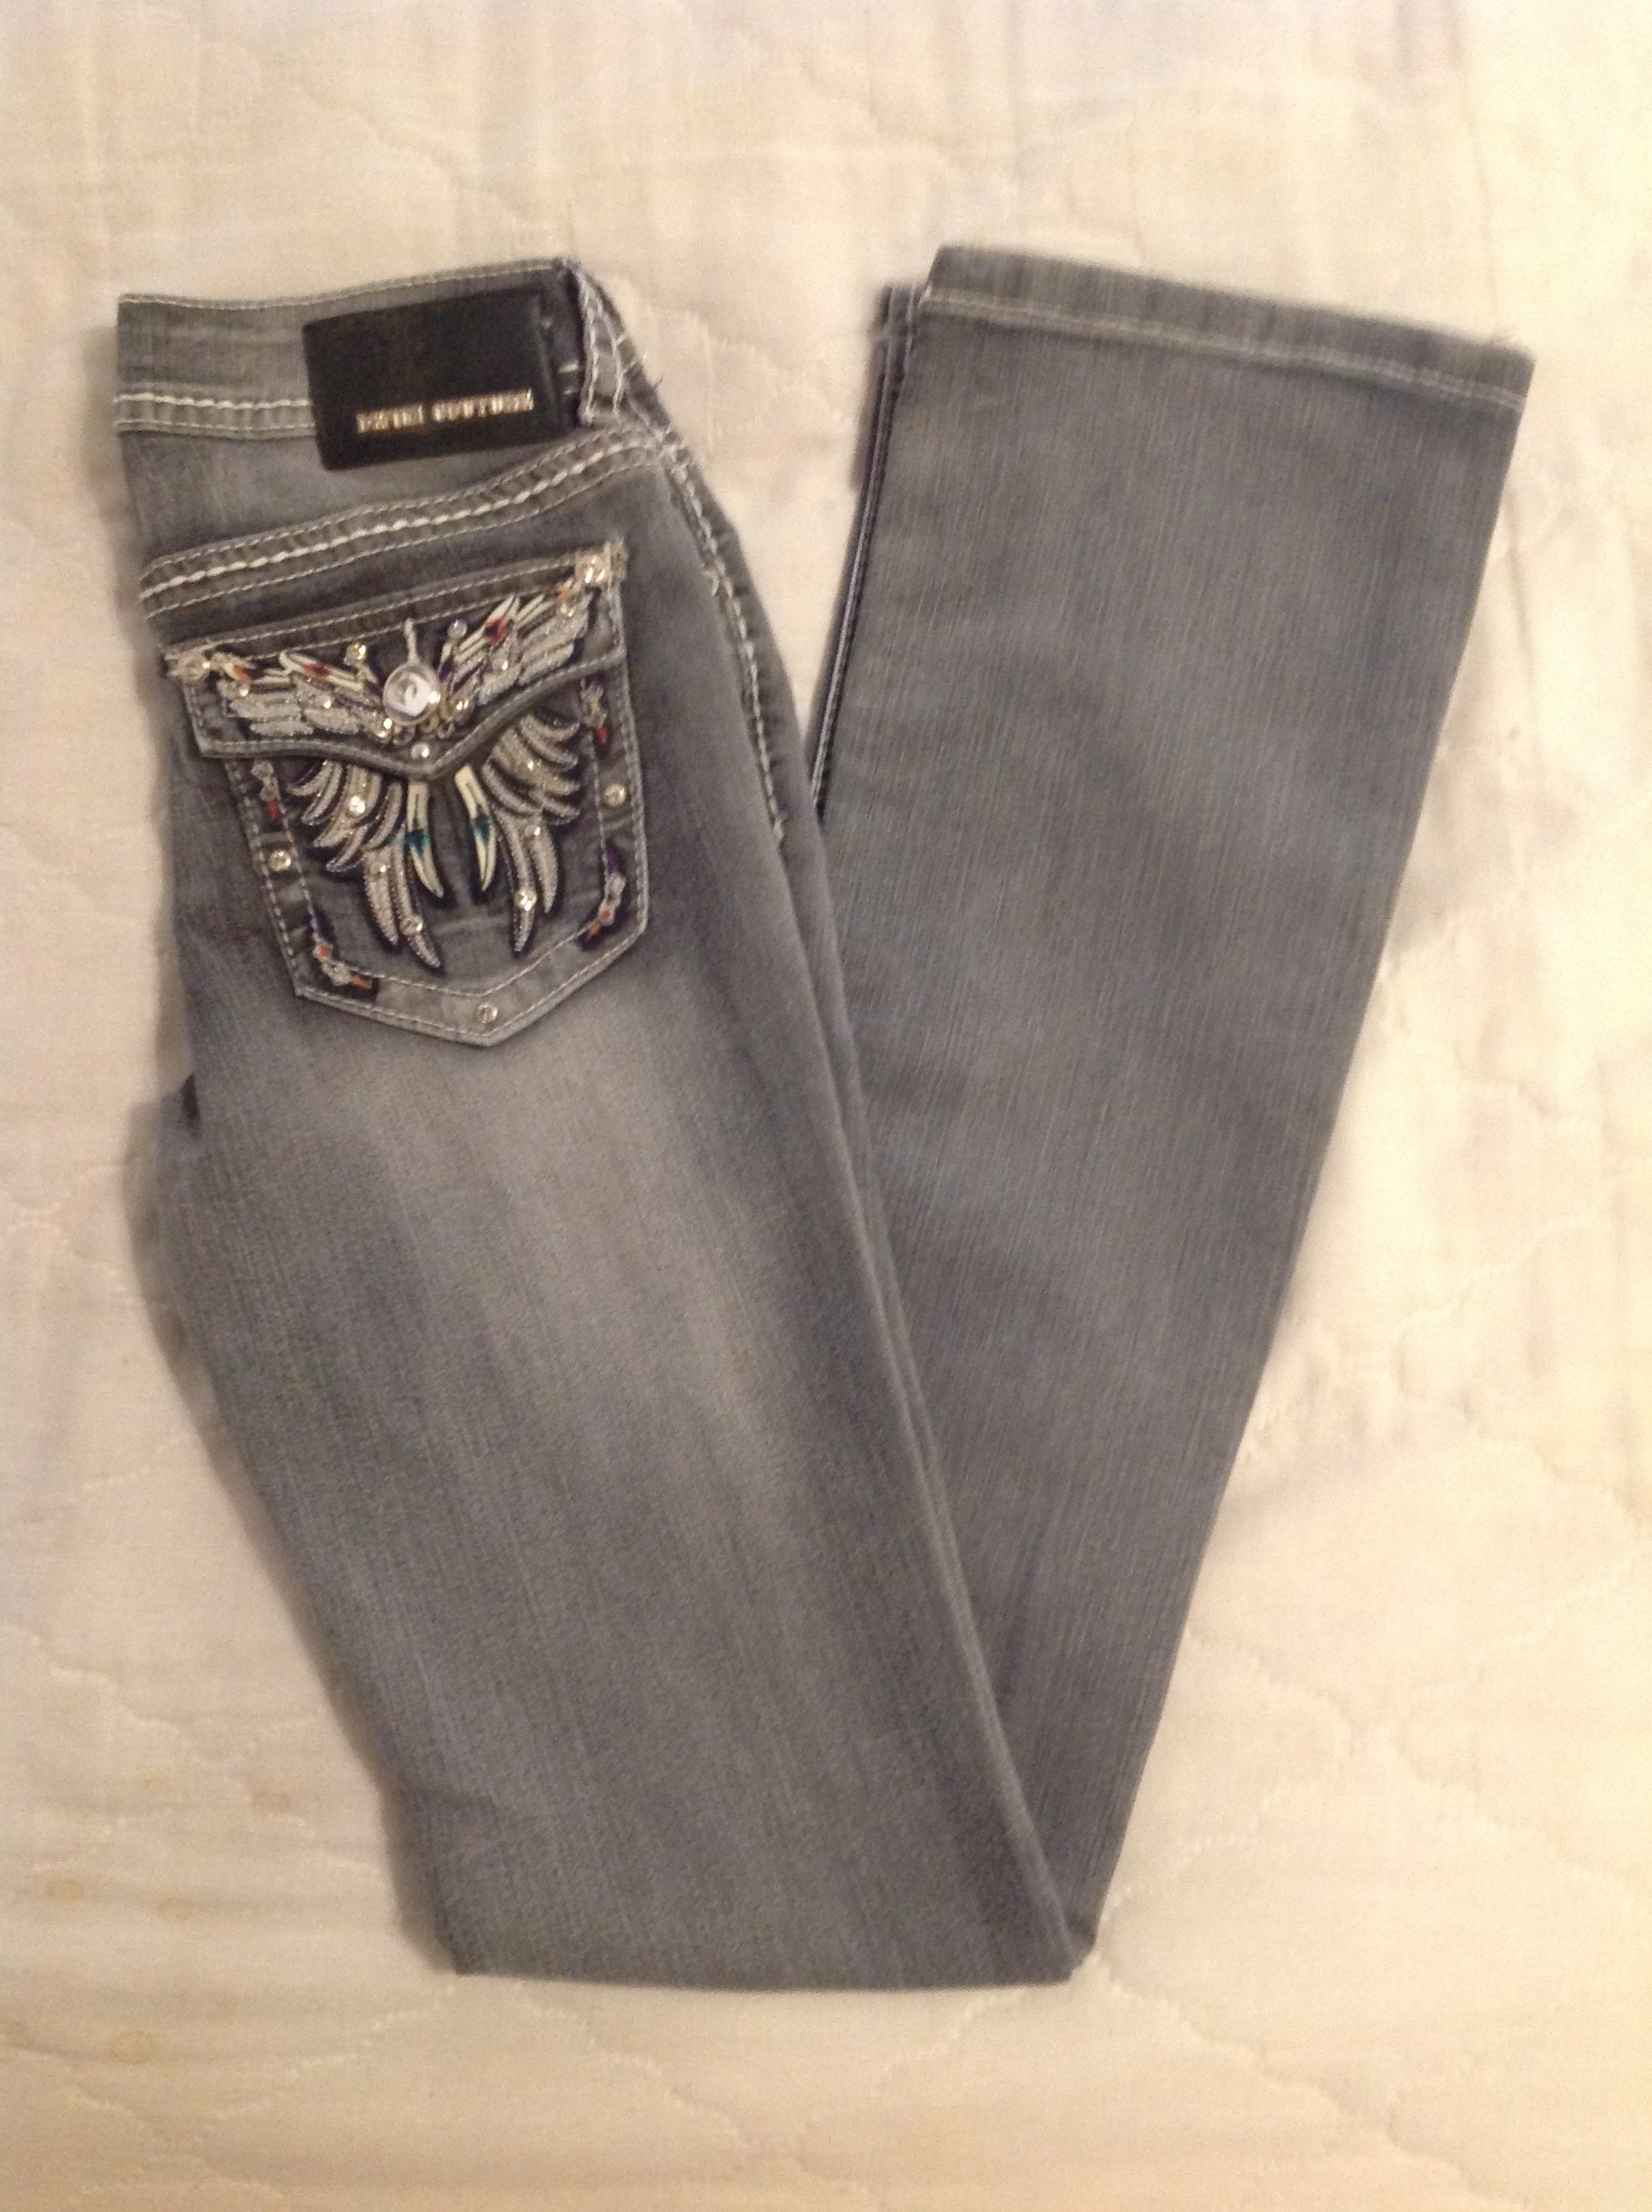 Sally Jeans | Denim Couture Bootcut Jeans Gray Colored Angel Wings